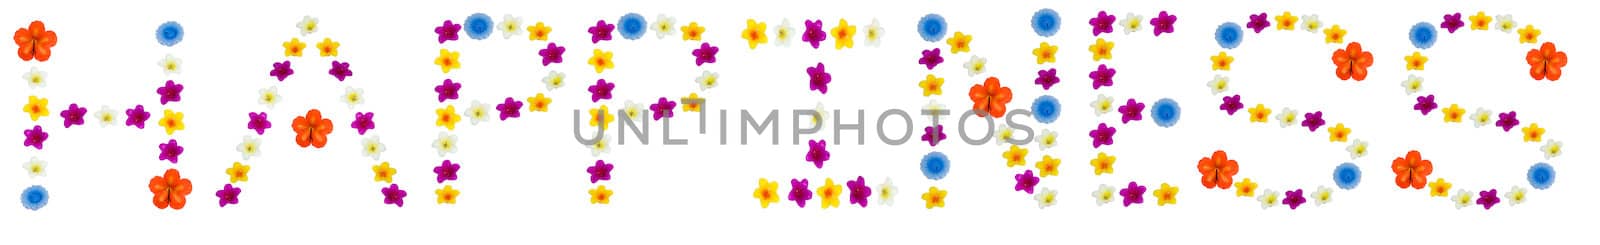 The word happiness made of flowered candles, isolated on a white background